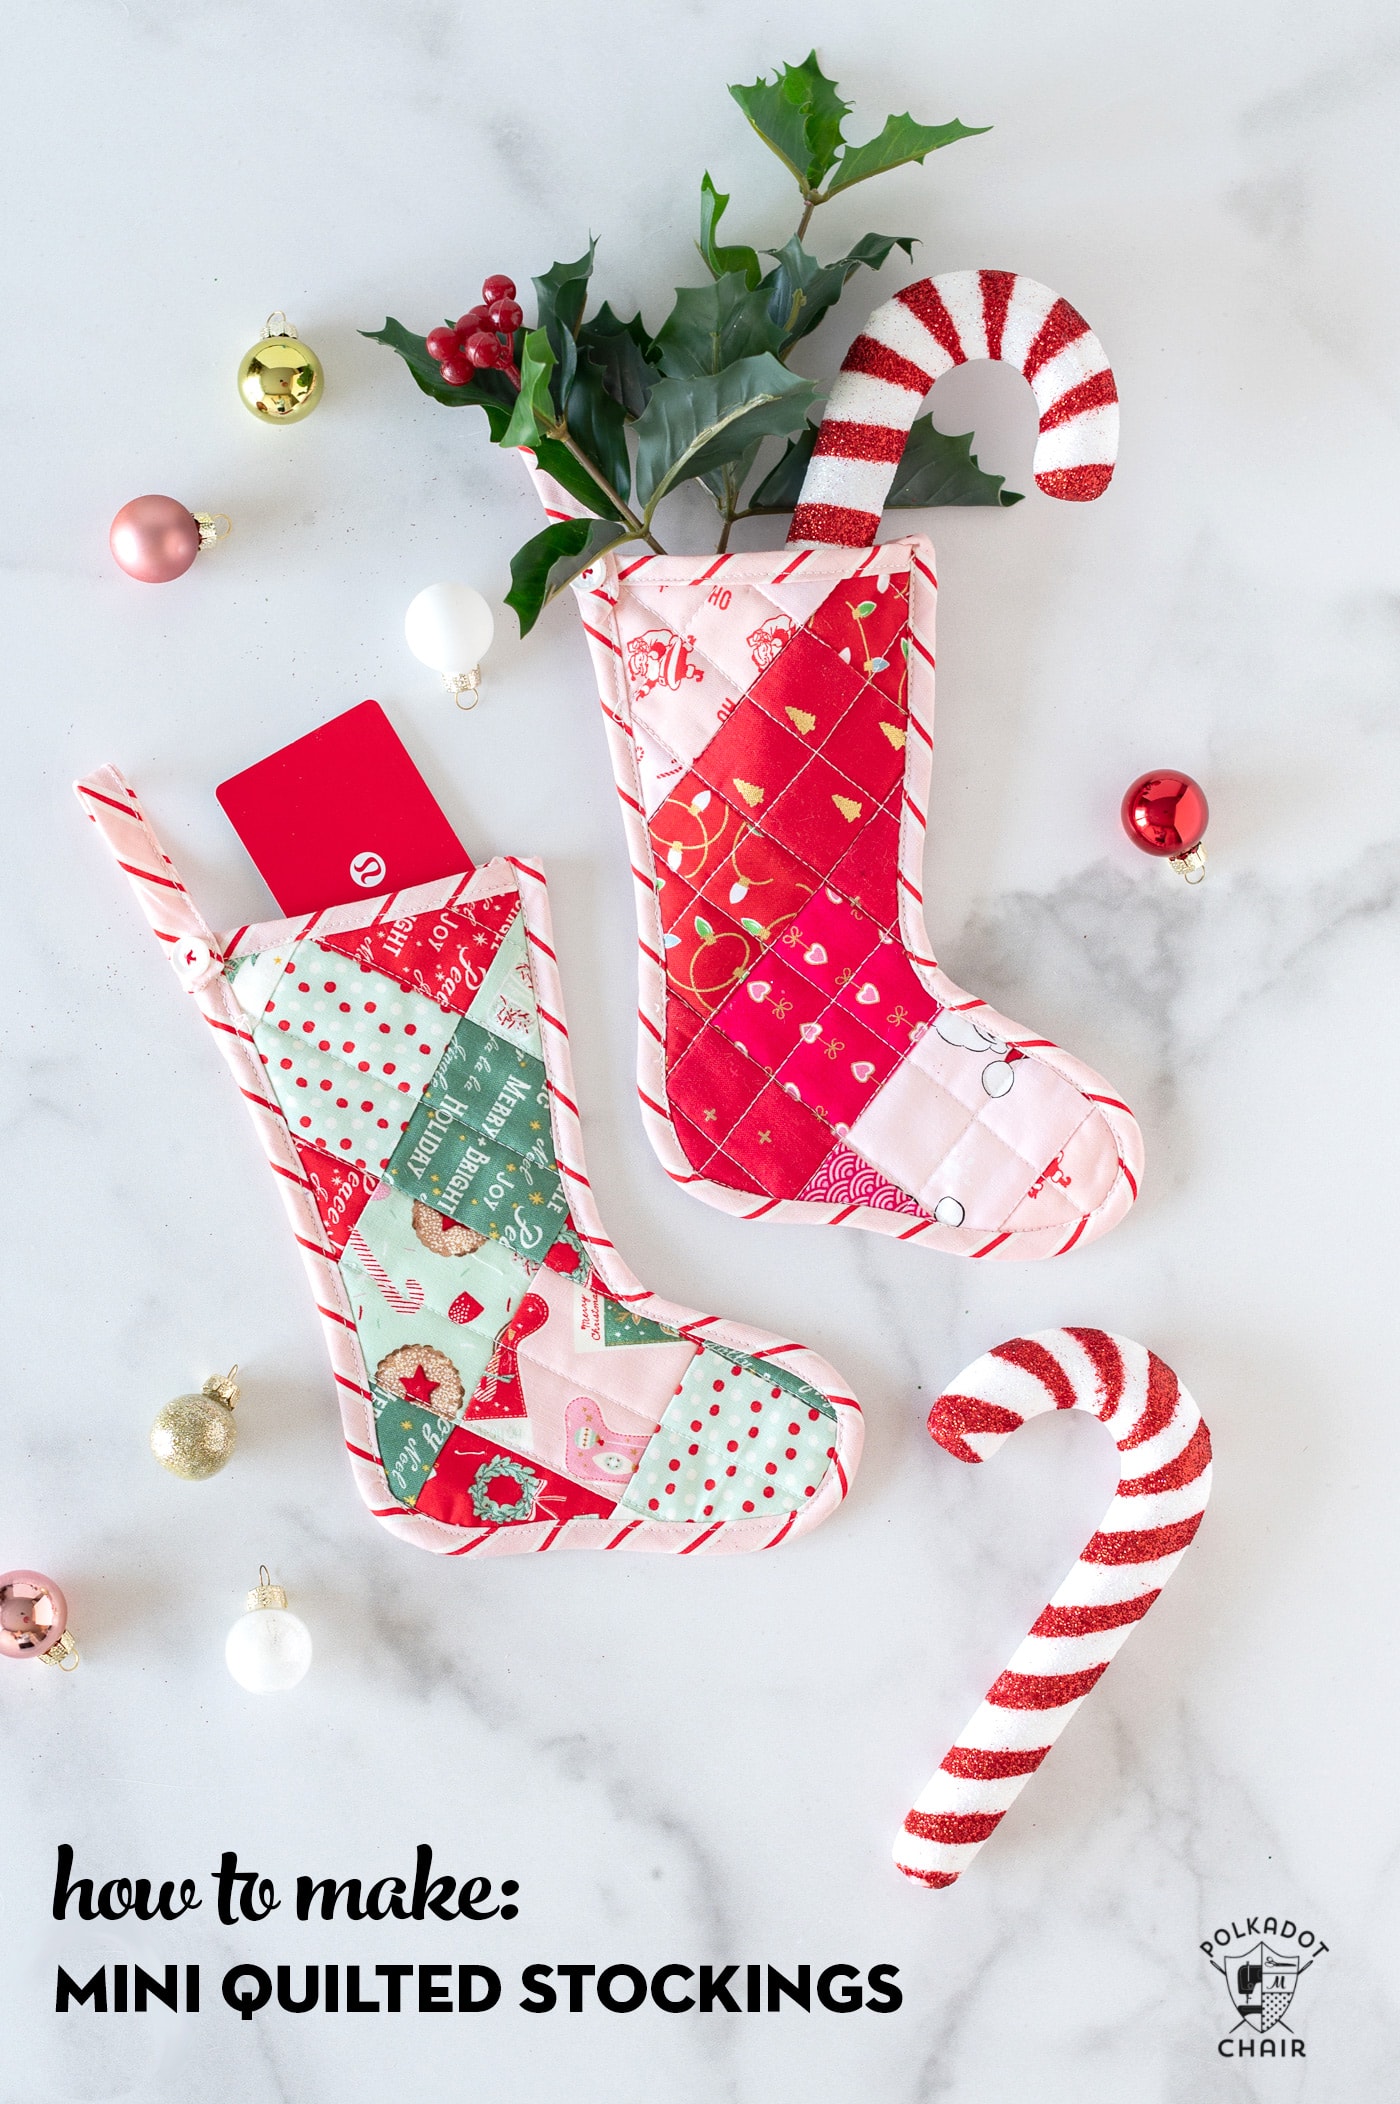 Pink and red mini quilted stockings on white tabletop with Christmas decorations